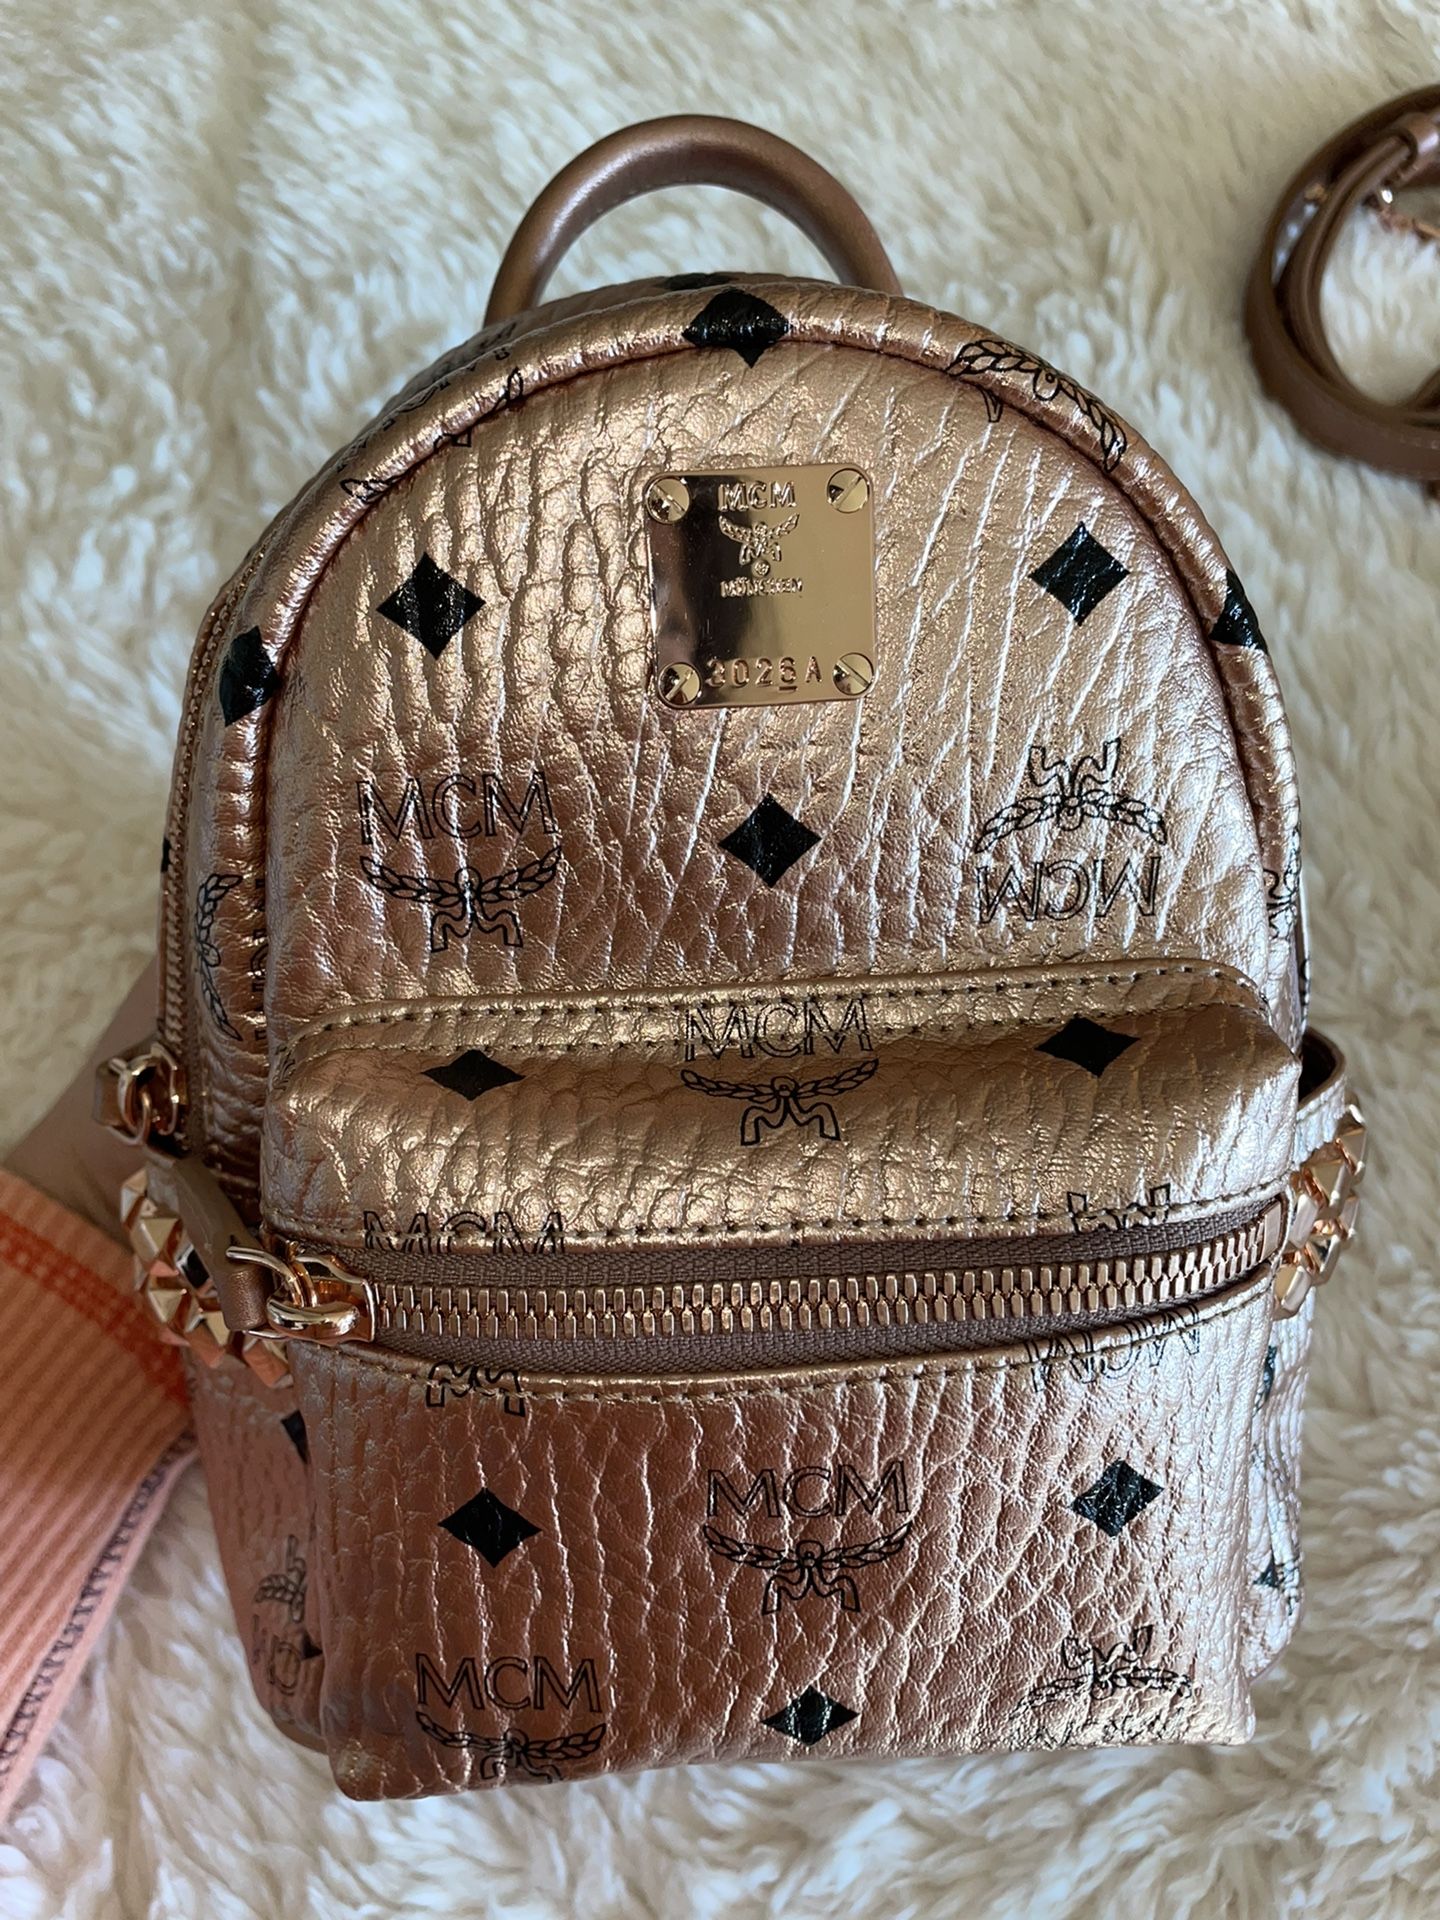 Authentic MCM Backpack for Sale in San Diego, CA - OfferUp